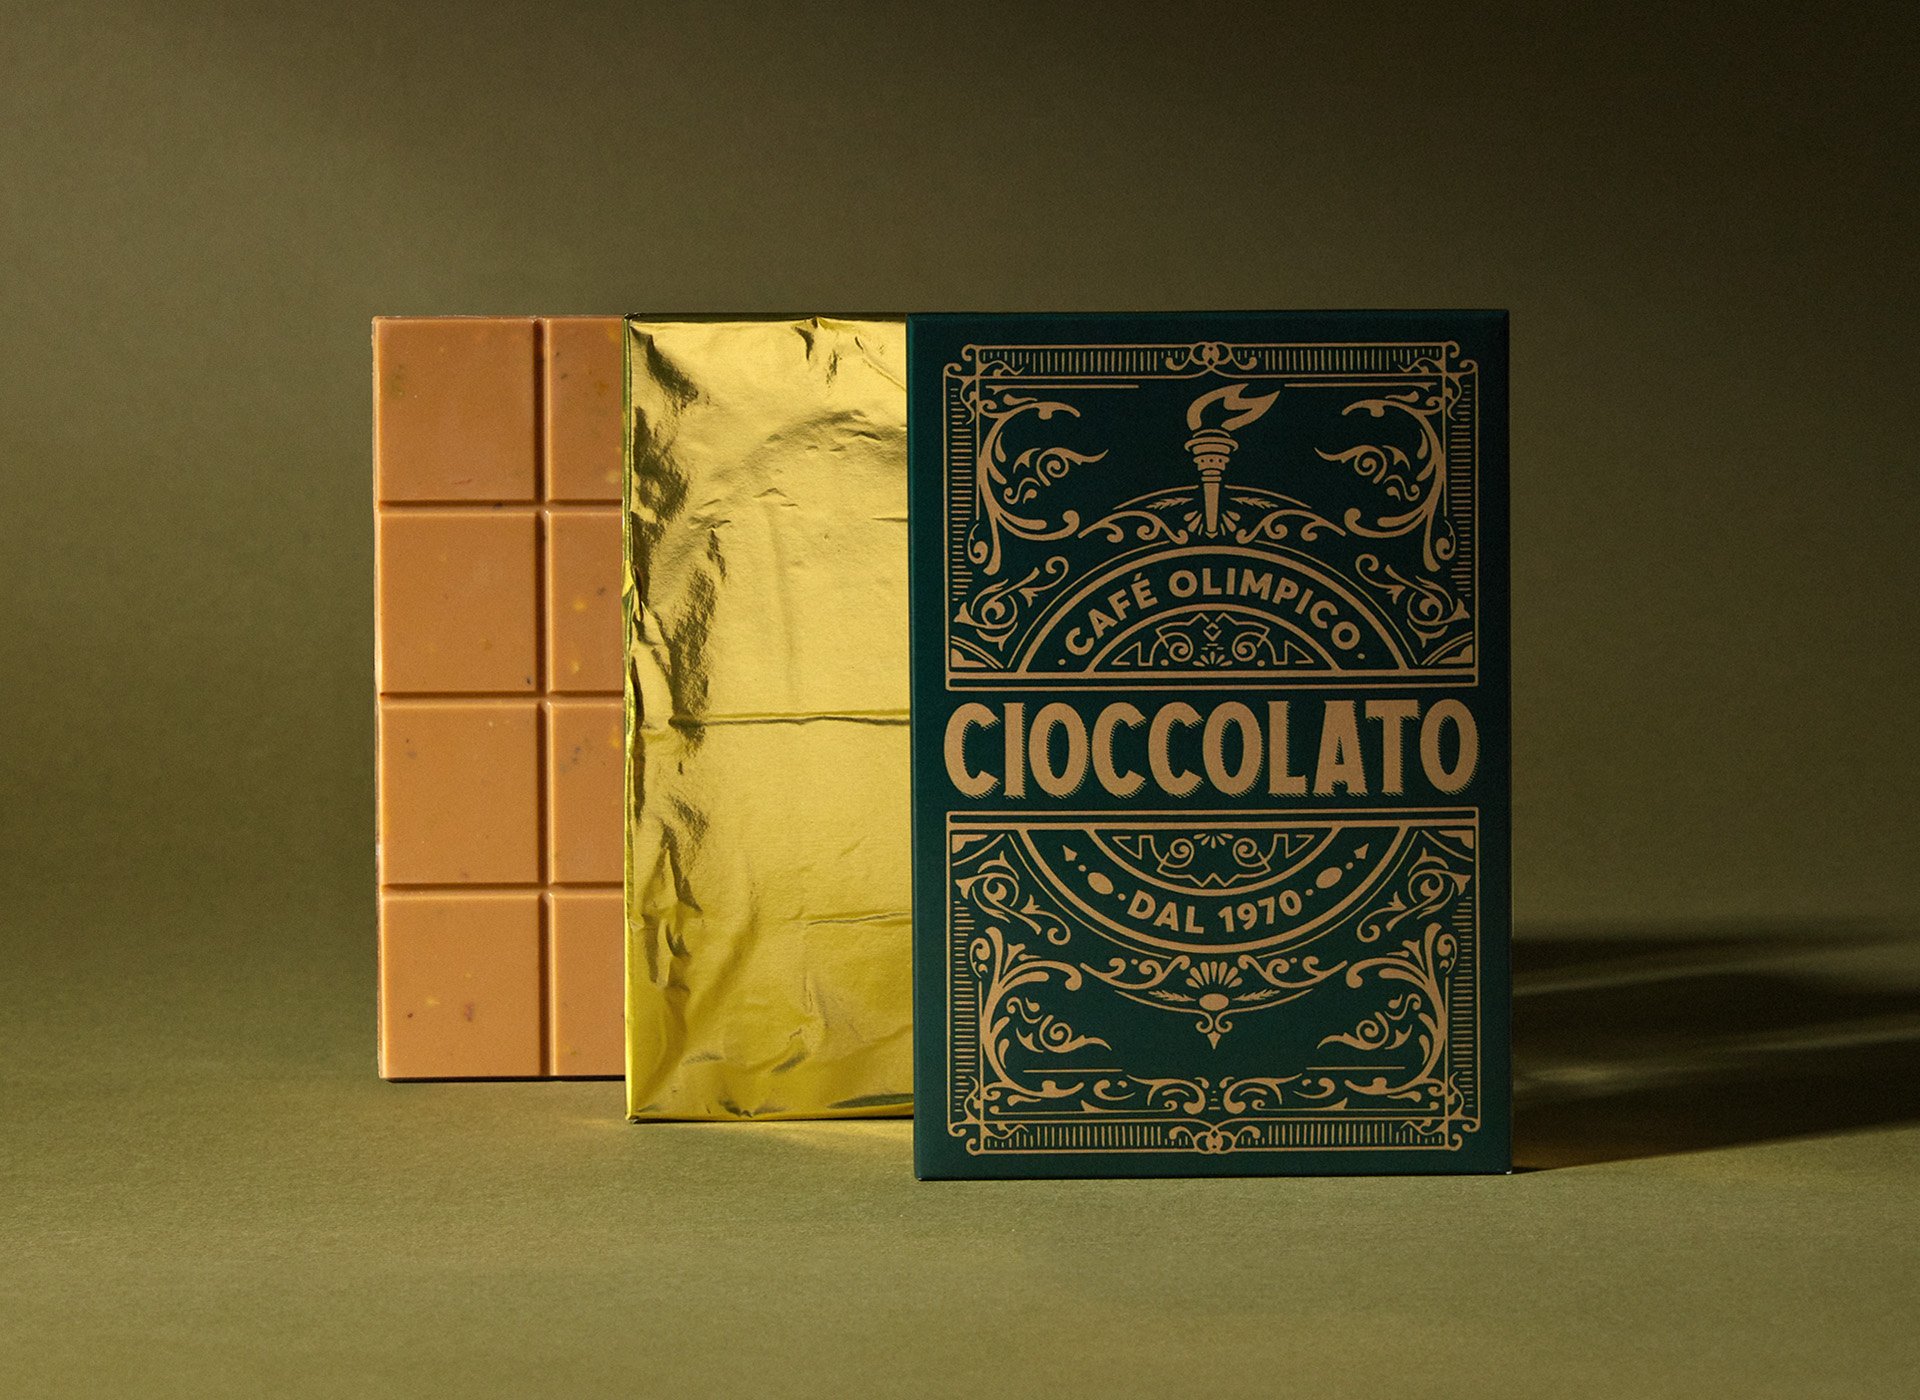 Café Olimpico Nails a Timeless, Old-World Feel with Their Charming Vintage Chocolate Wrapping